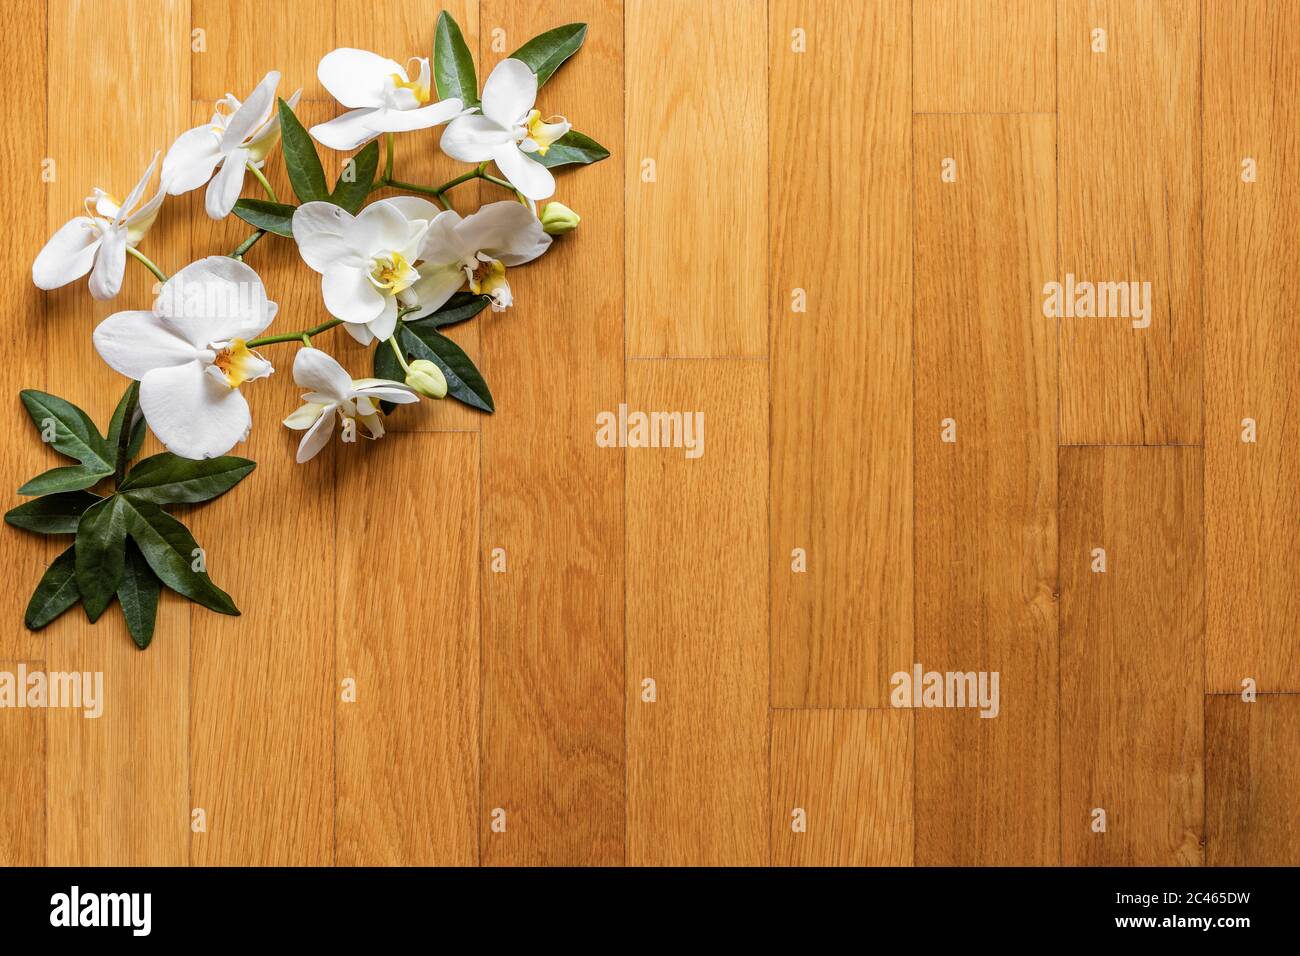 Texture, background with white orchid flowers and green leaves on a wooden surface (parquet, wooden strips). Rustic, vintage, natural, traditional, gr Stock Photo